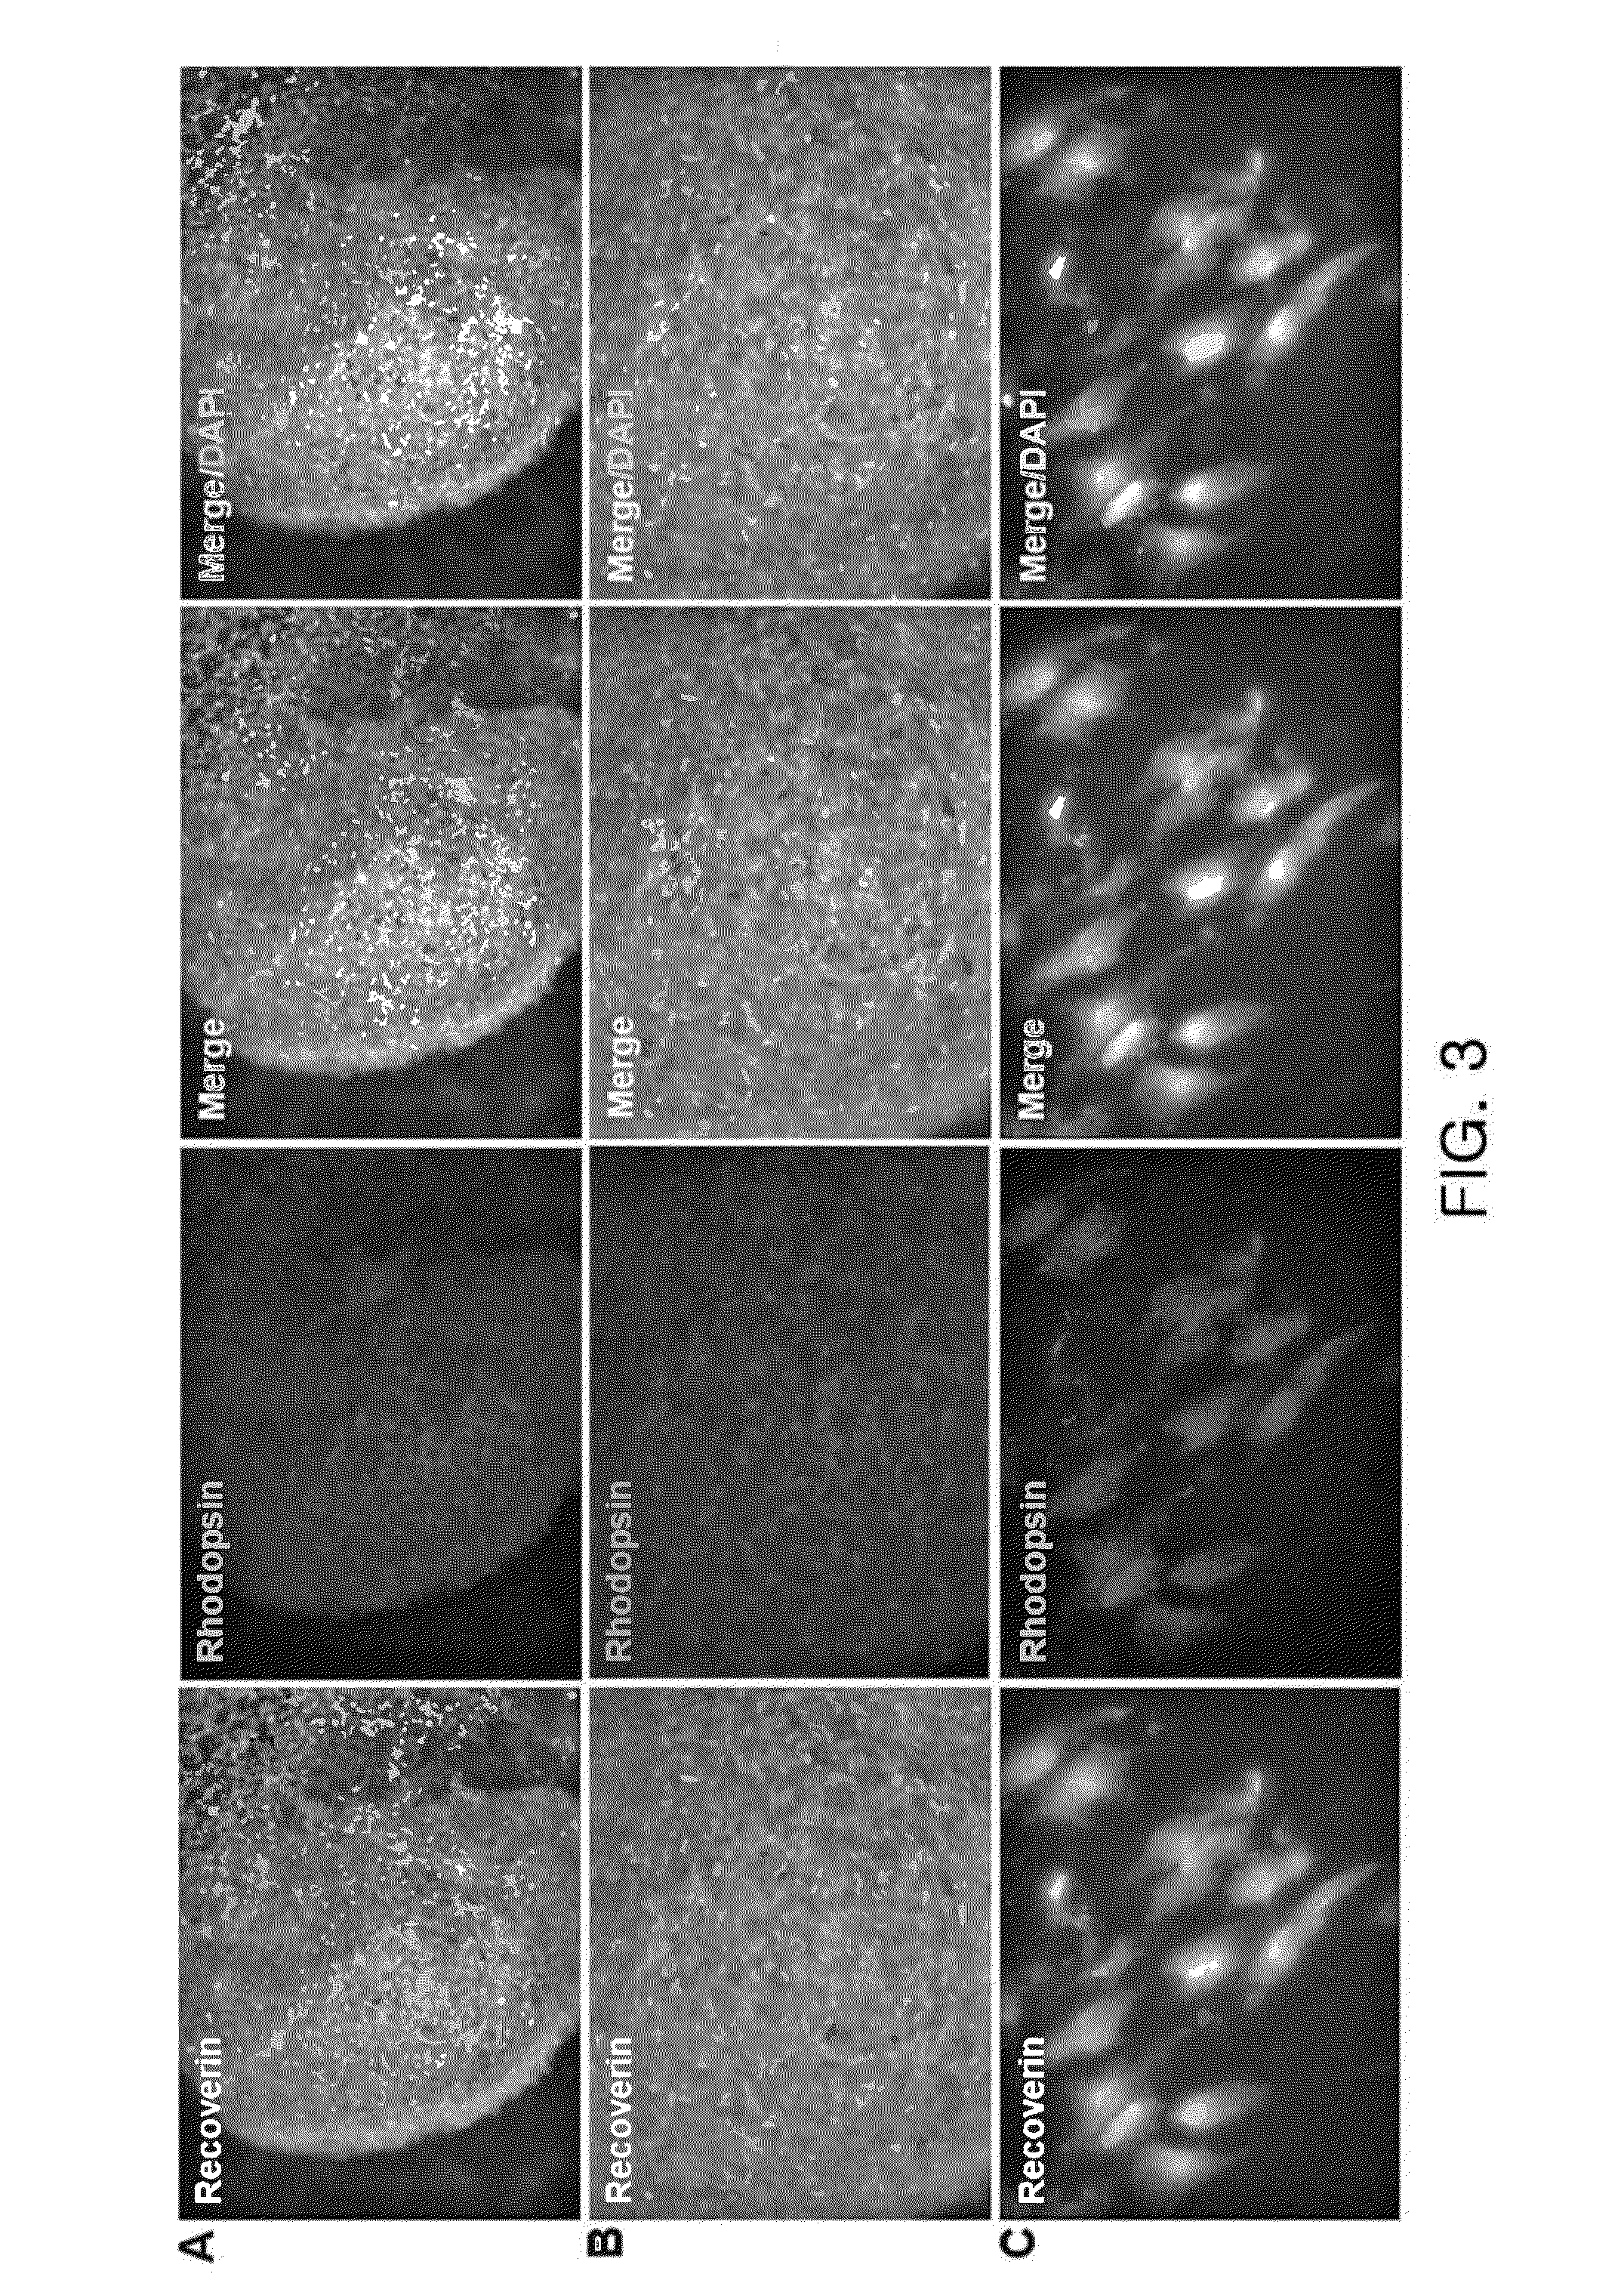 Compositions for inducing differentiation into retinal cells from retinal progenitor cells or inducing proliferation of retinal cells comprising Wnt signaling pathway activators